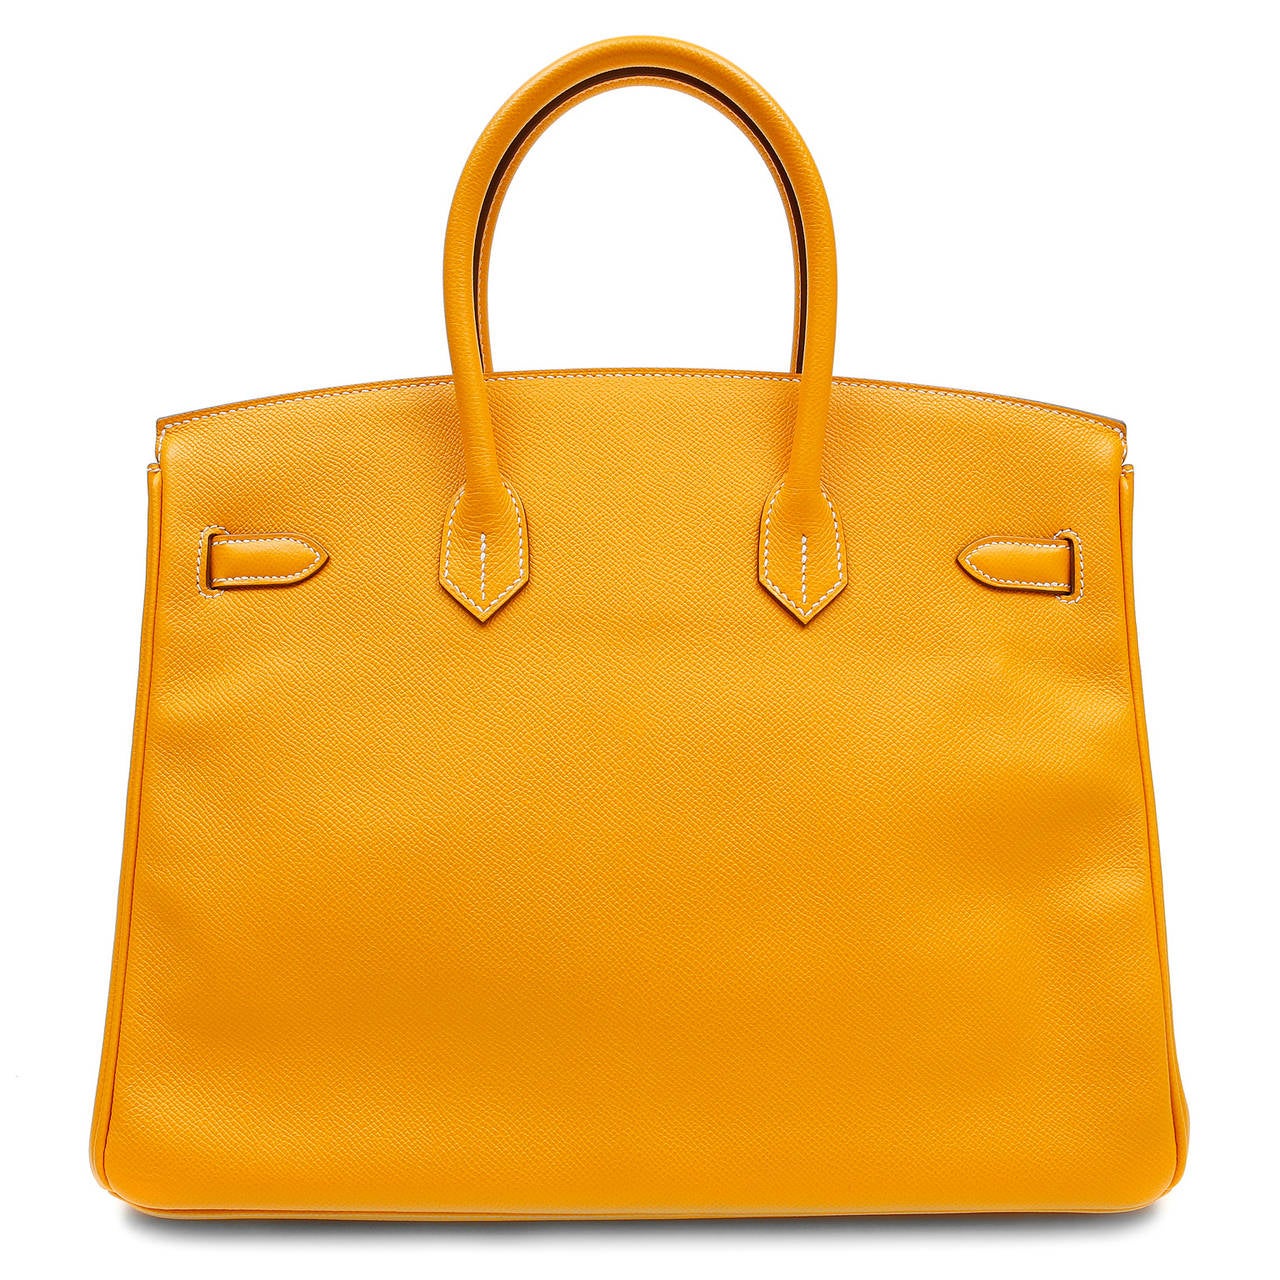 Hermès Jaune D’or Epsom Leather 35 cm Birkin- PRISTINE, Never Carried
Protective plastic is intact on the hardware
    Hand stitched by skilled craftsmen, wait lists of a year or more are commonplace for the Birkin.  The sunny lemon yellow is